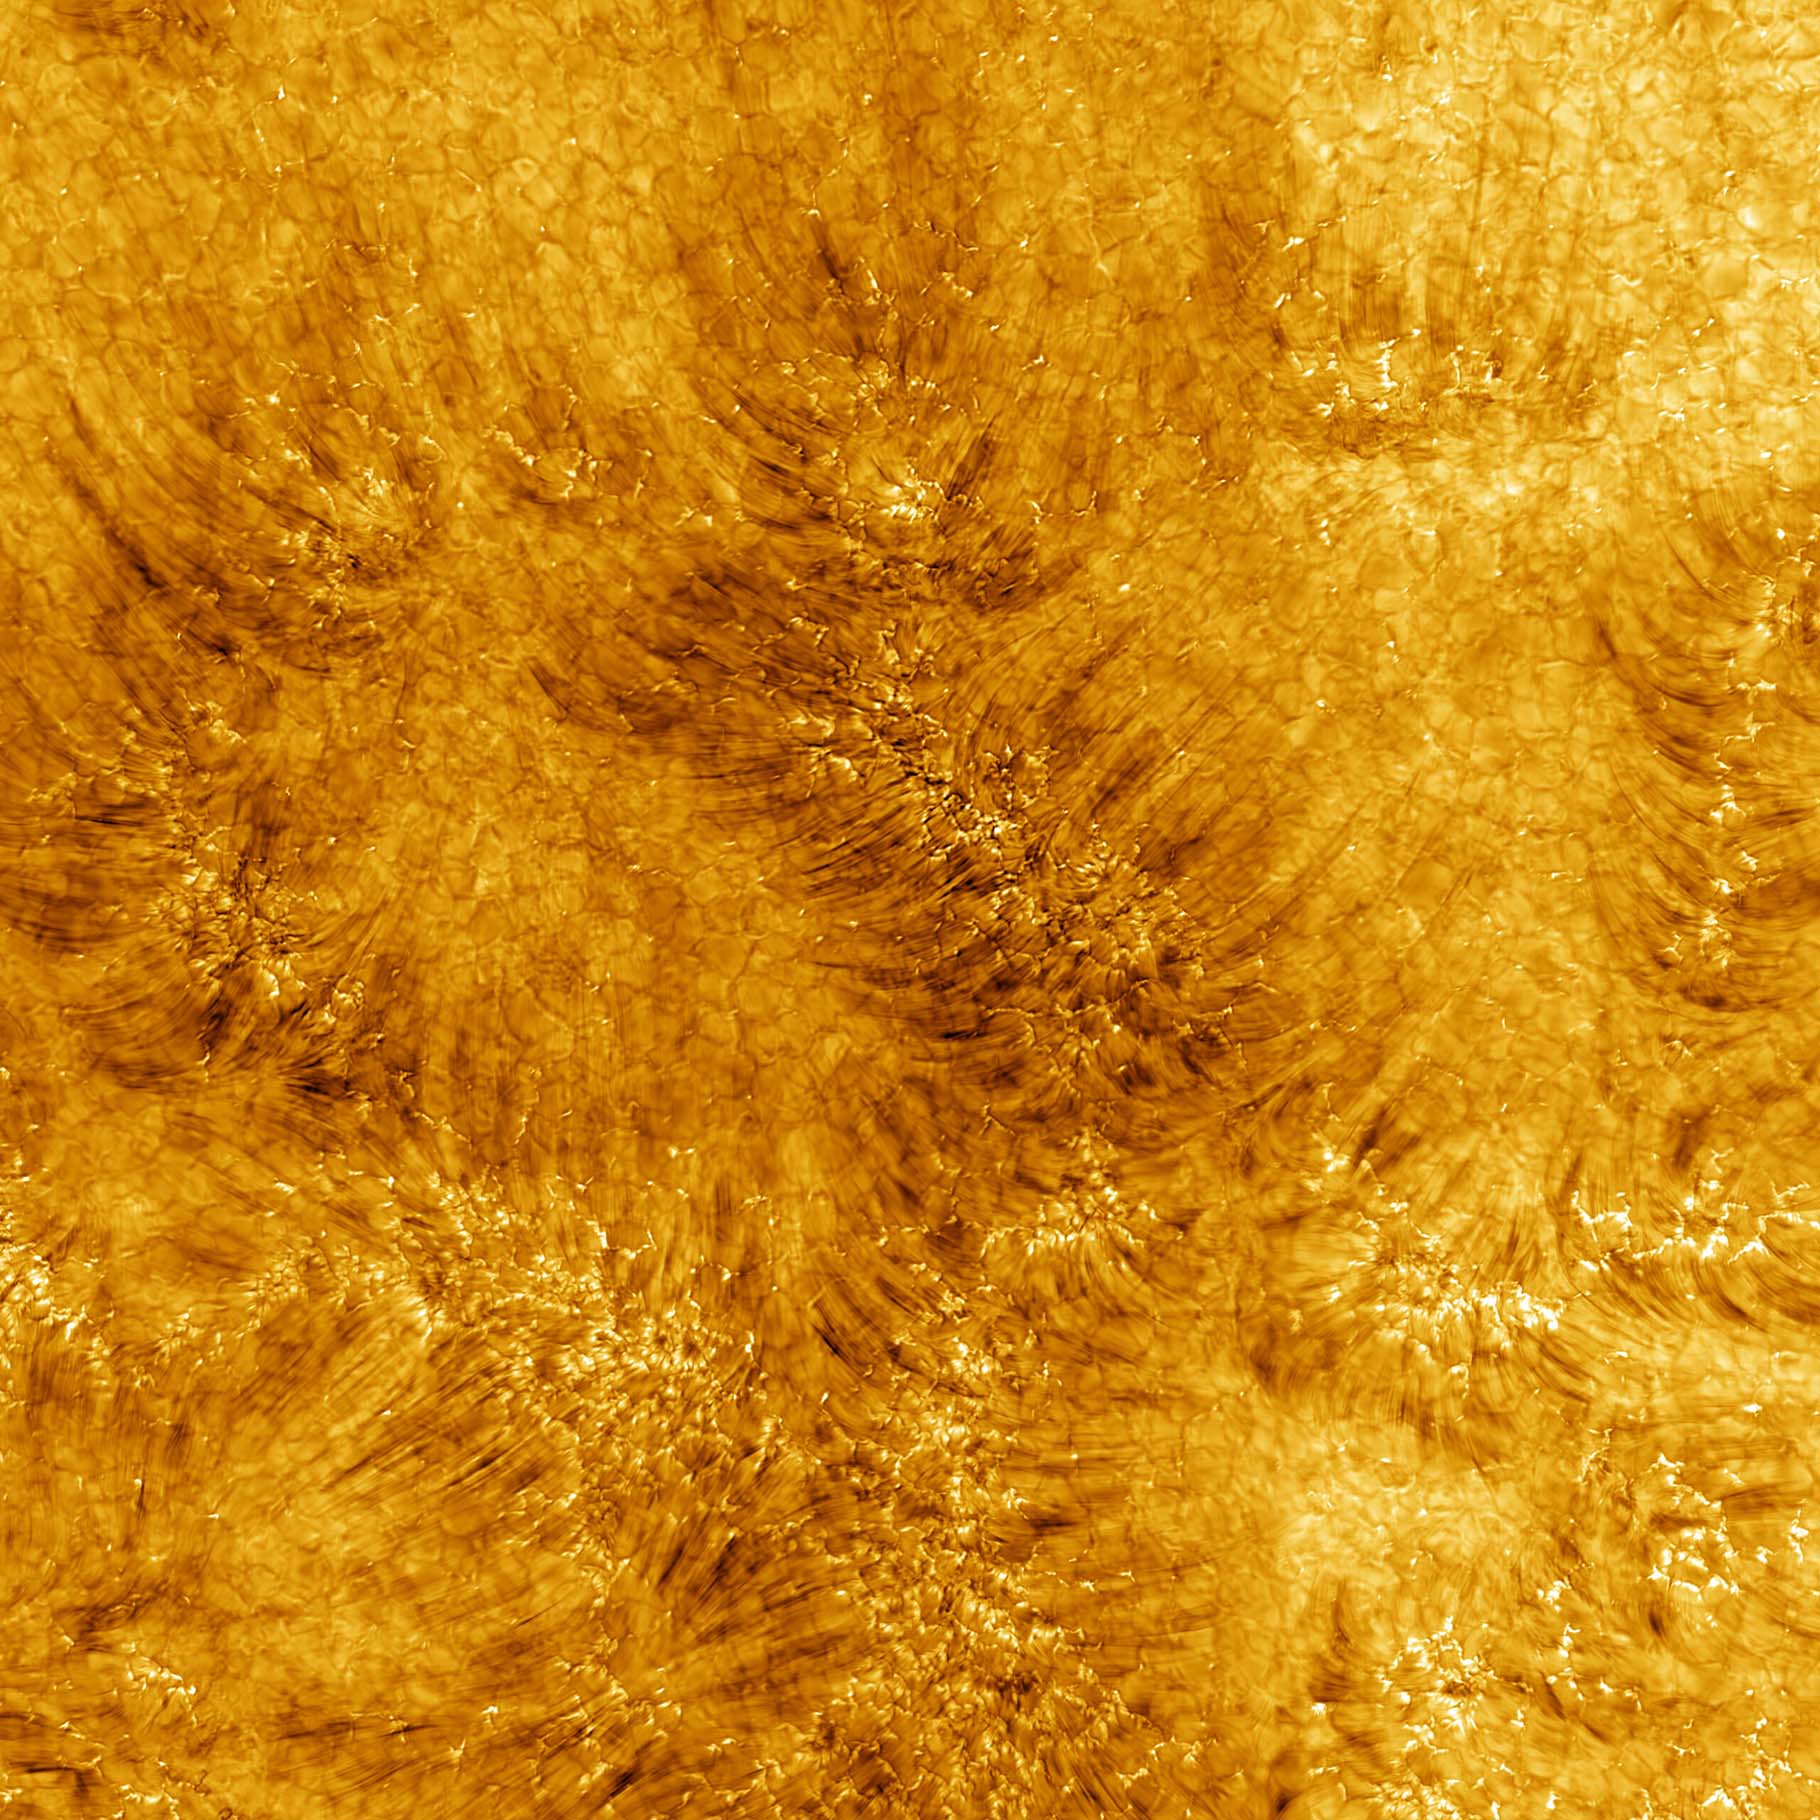 This image of the Sun's chromosphere shows turbulent motion with ridges of orange and yellow. Under the motion is a glimpse of the cellular structure of the Sun's surface.